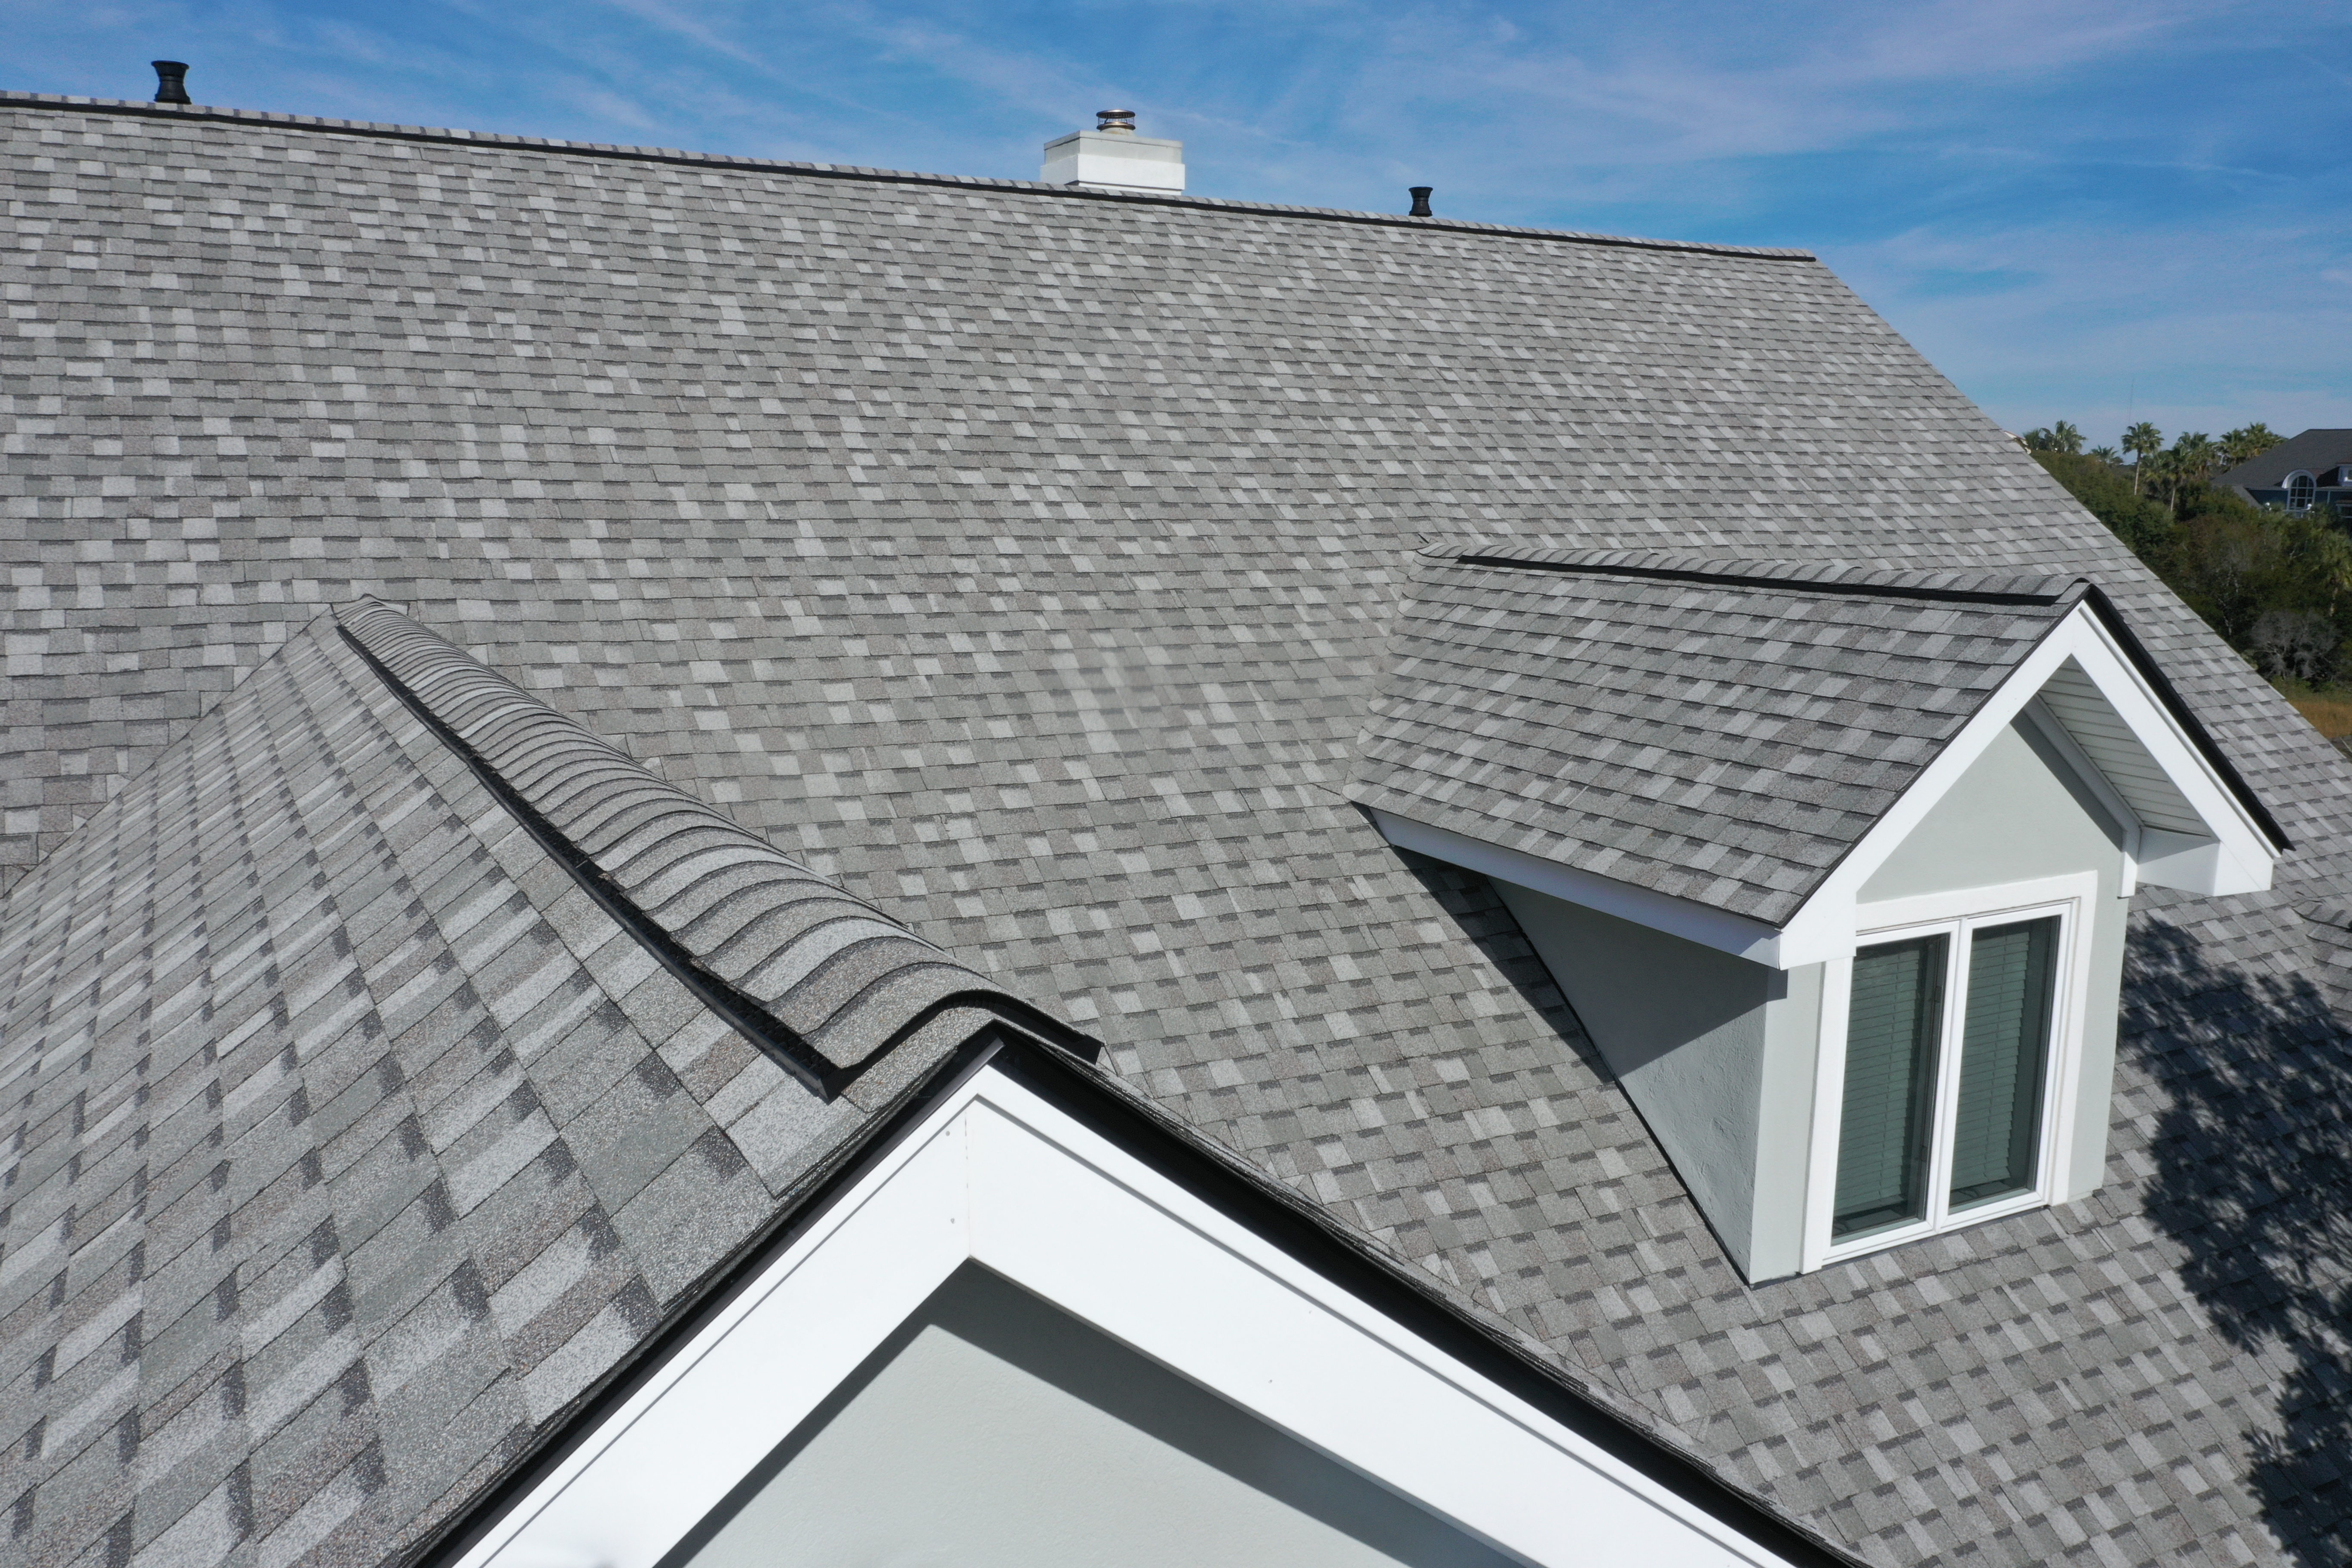 Considering 10 Important Factors For Choosing a Roof System